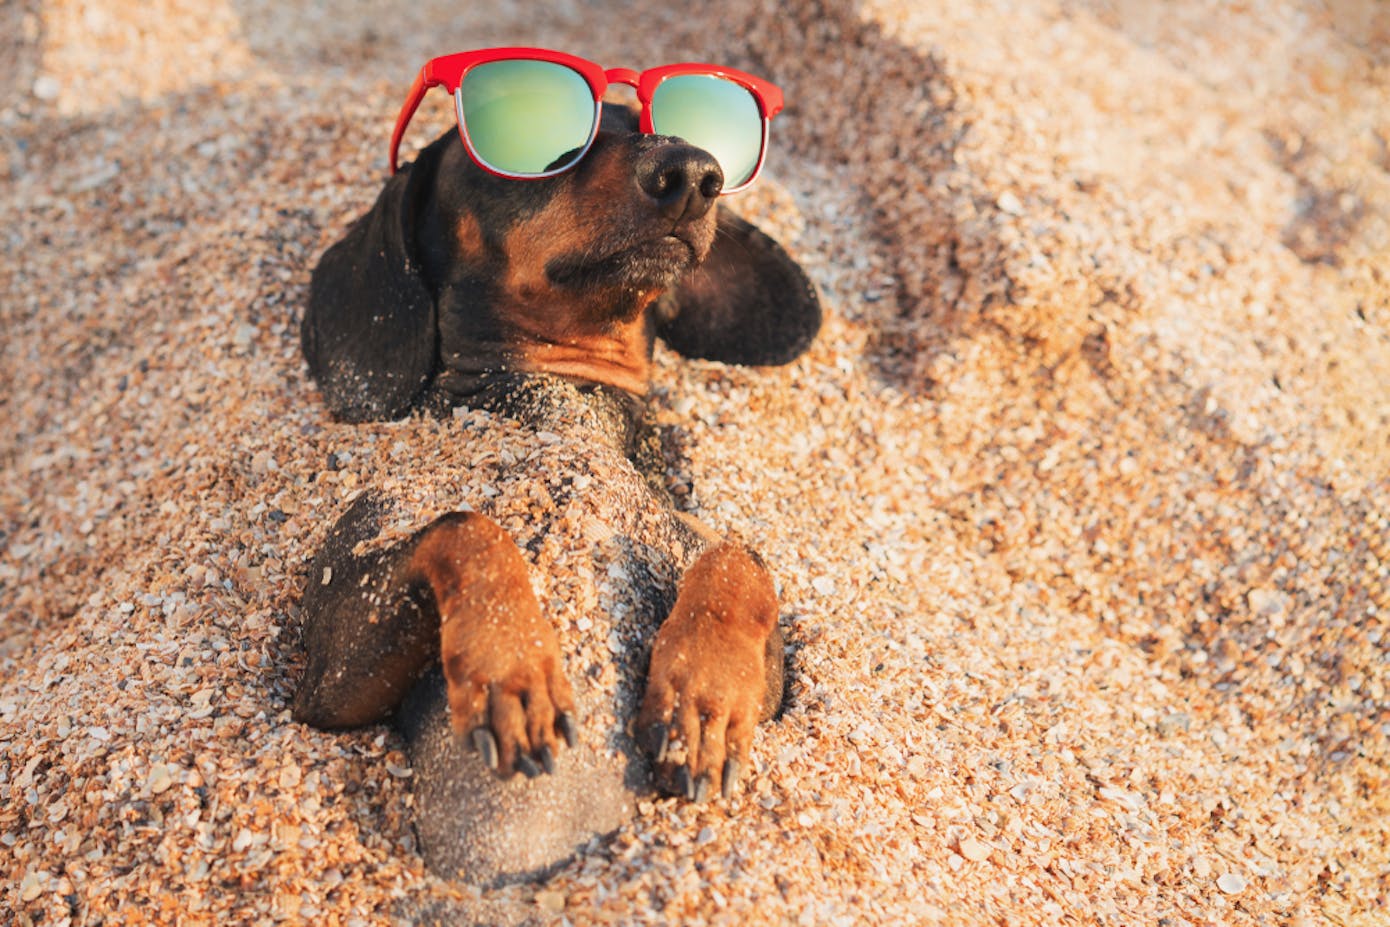 Dachshund chilling on the beach.